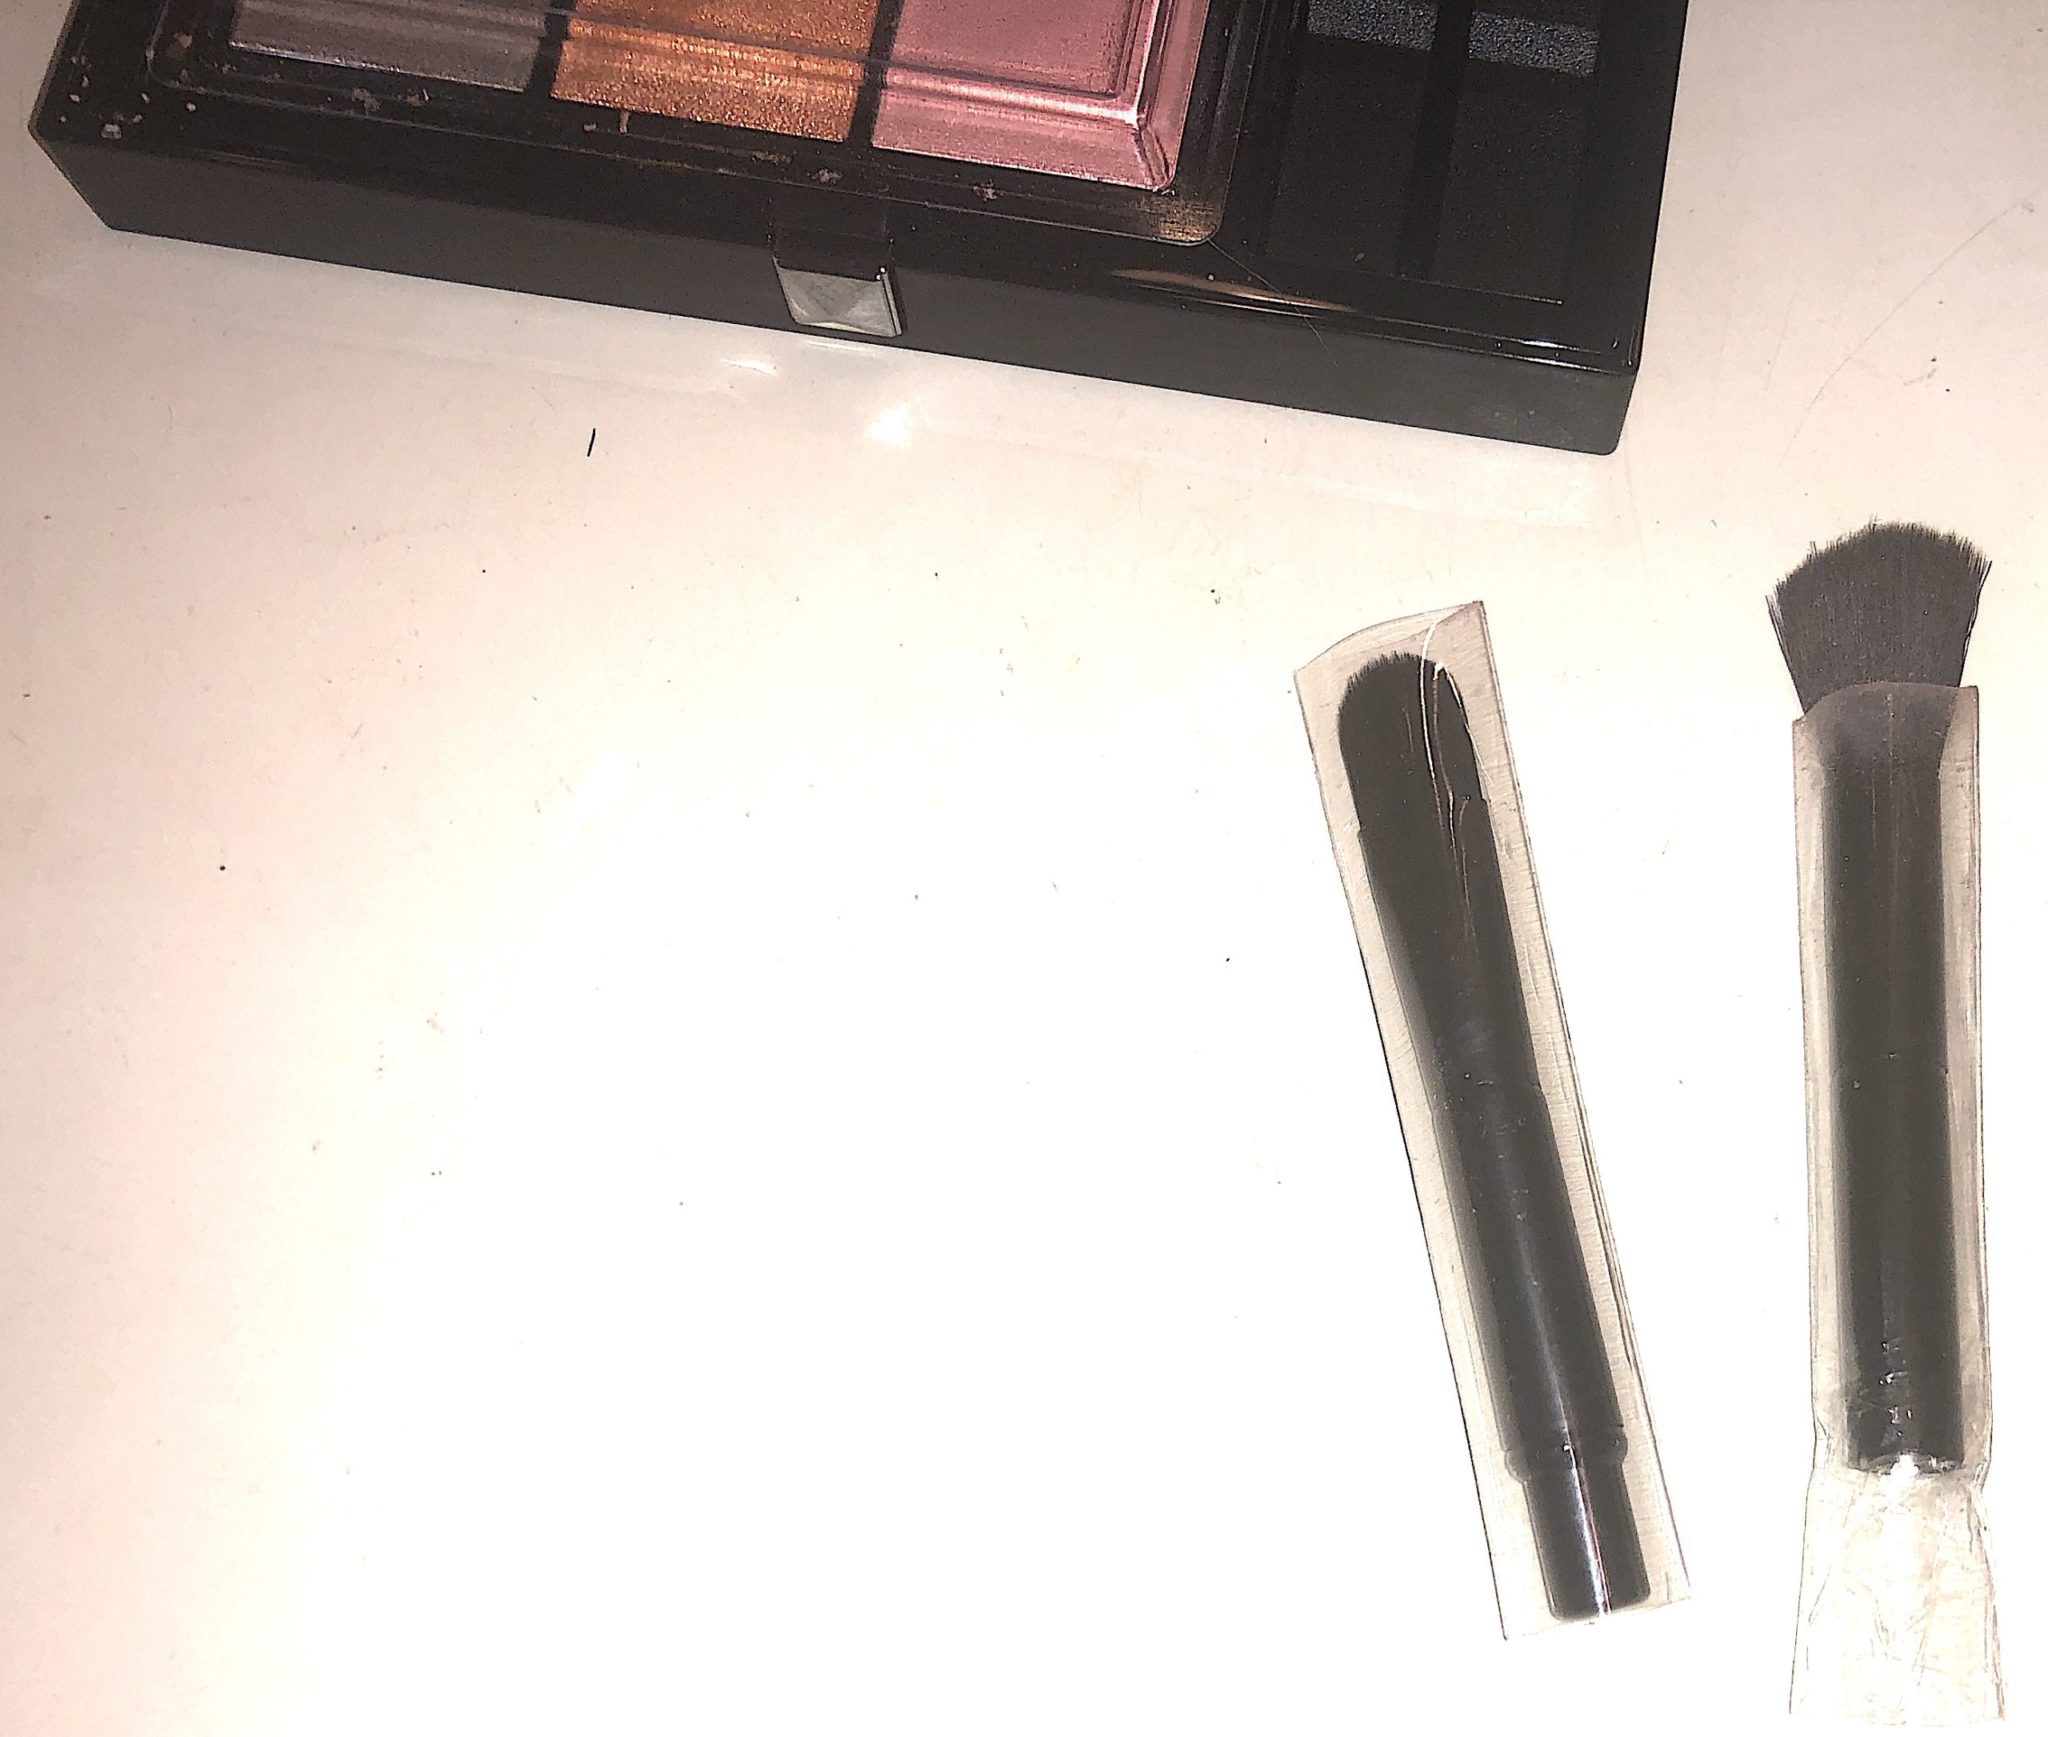 LE 9 DE GIVENCHY DOUBLE-ENDED EYESHADOW BRUSH